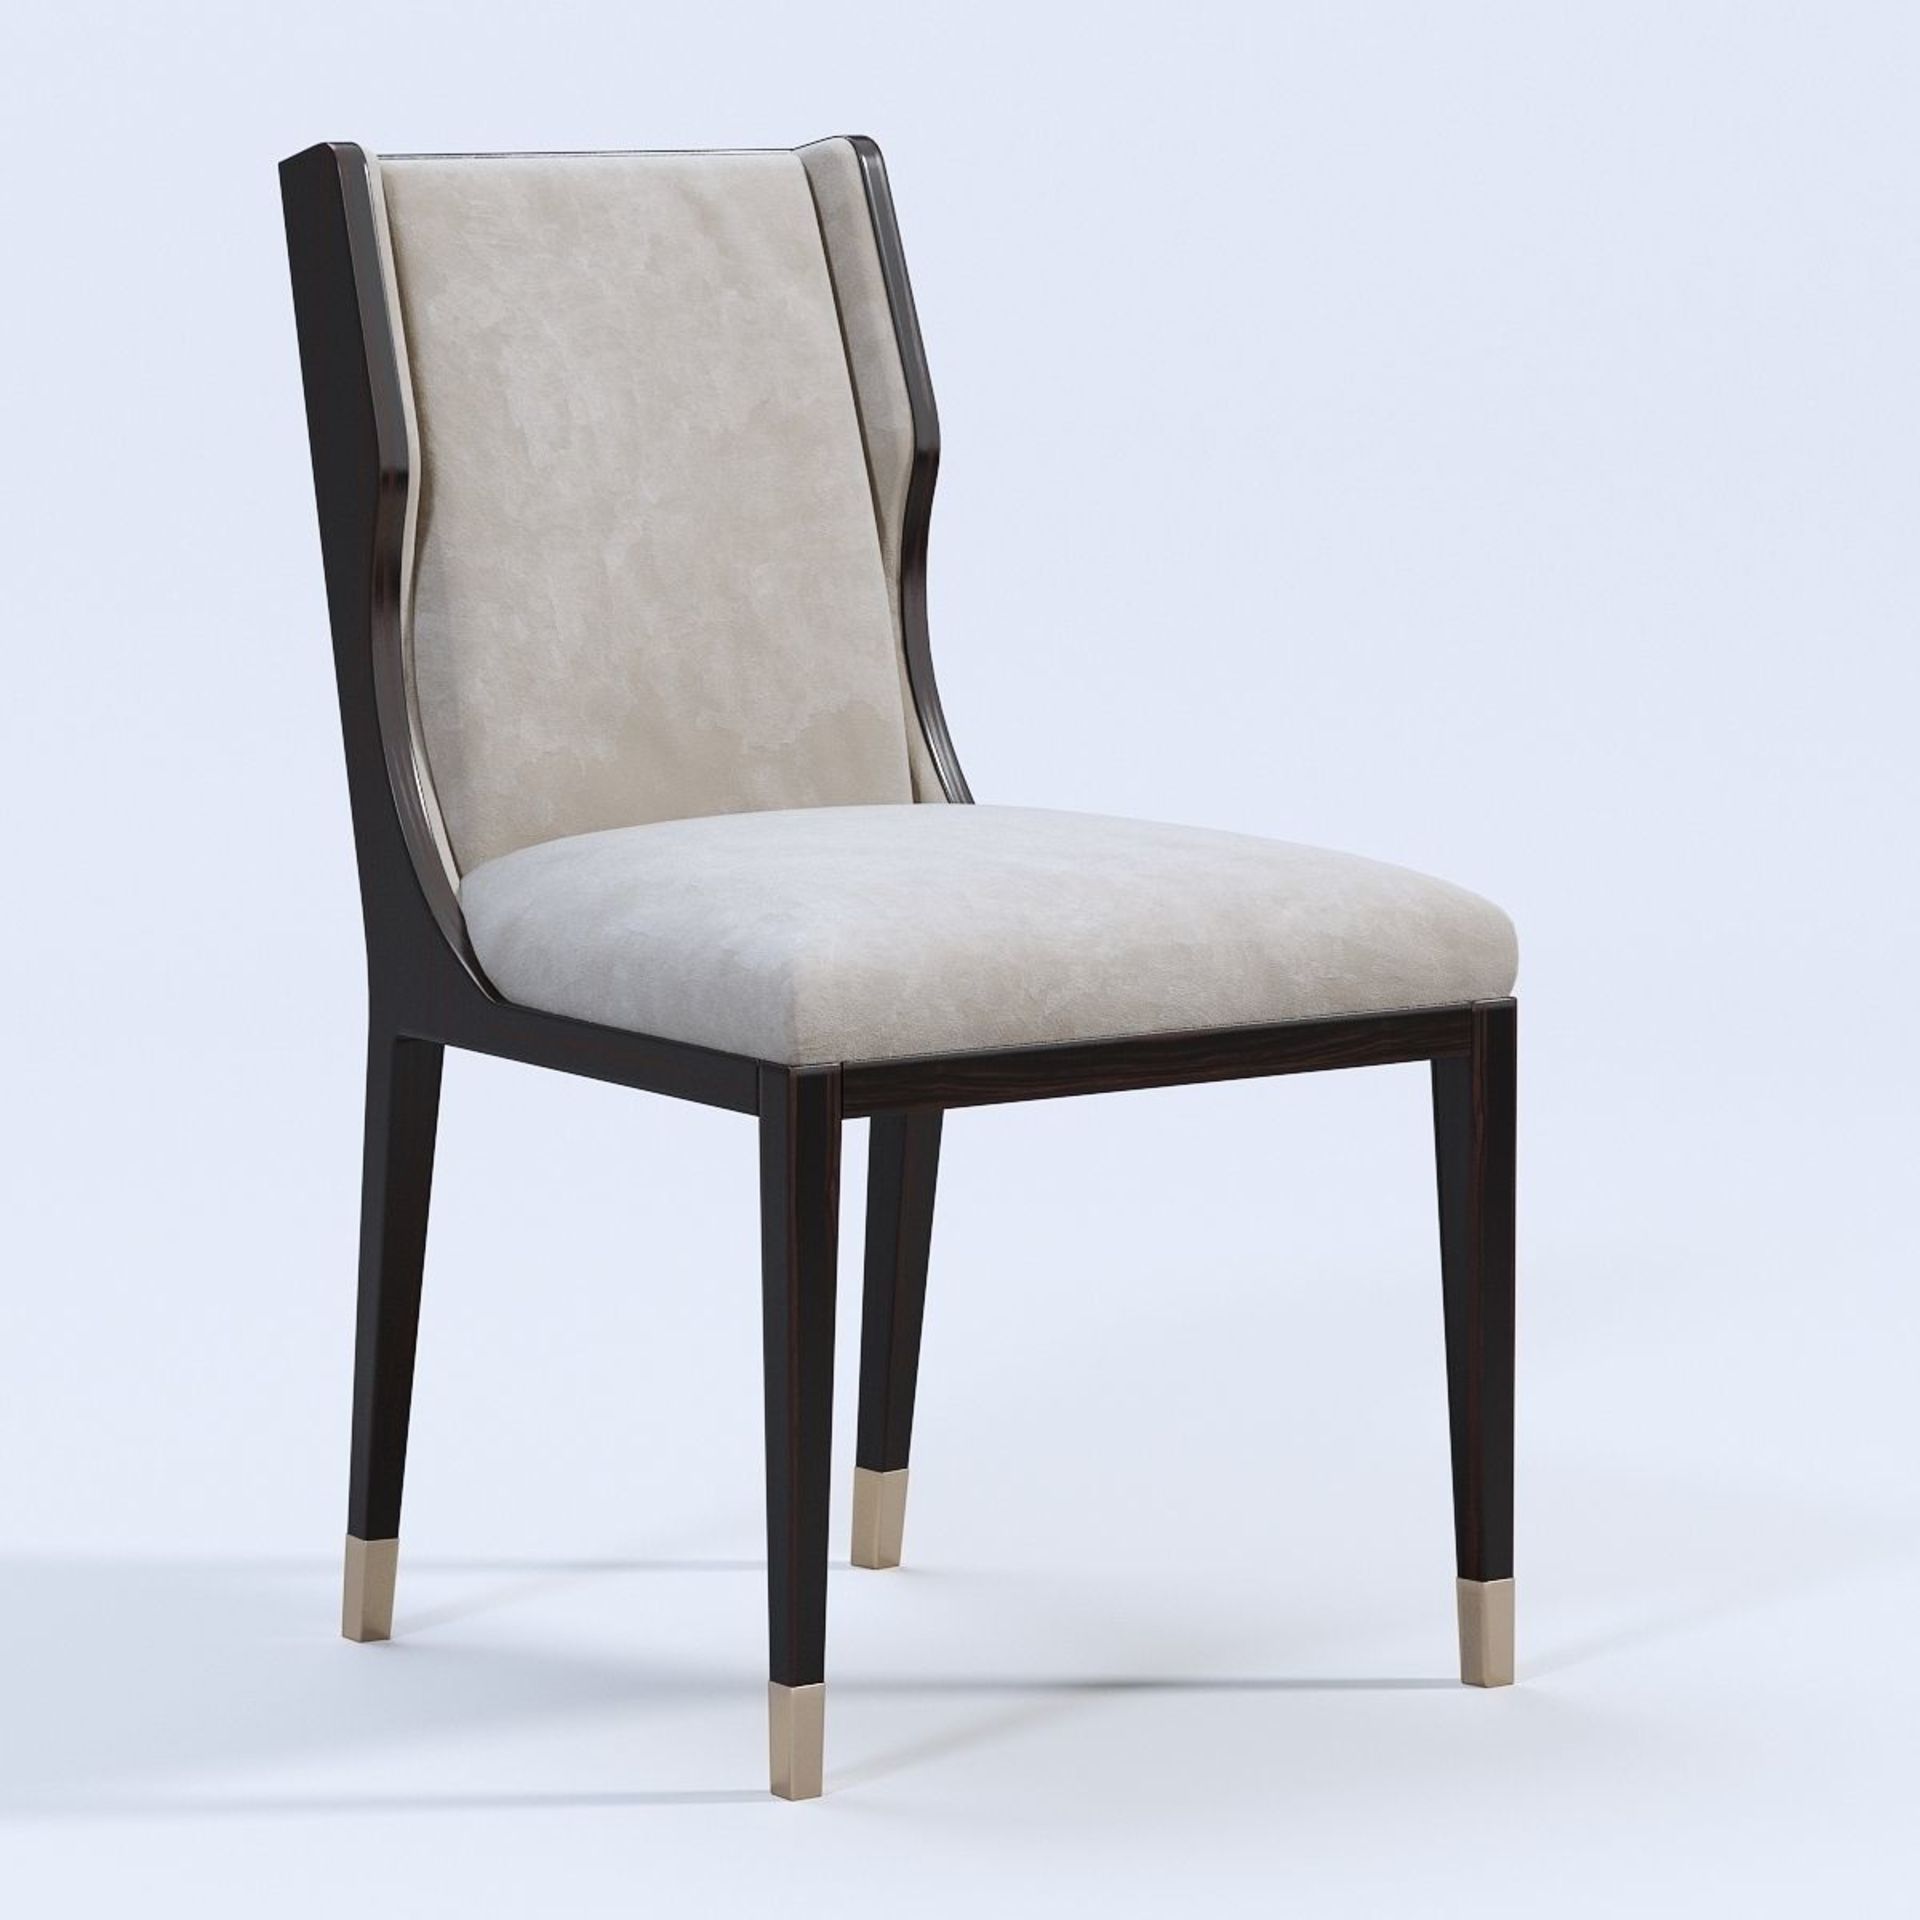 Kelly Hoppen Taylor Dining Chair Fallon White Leather